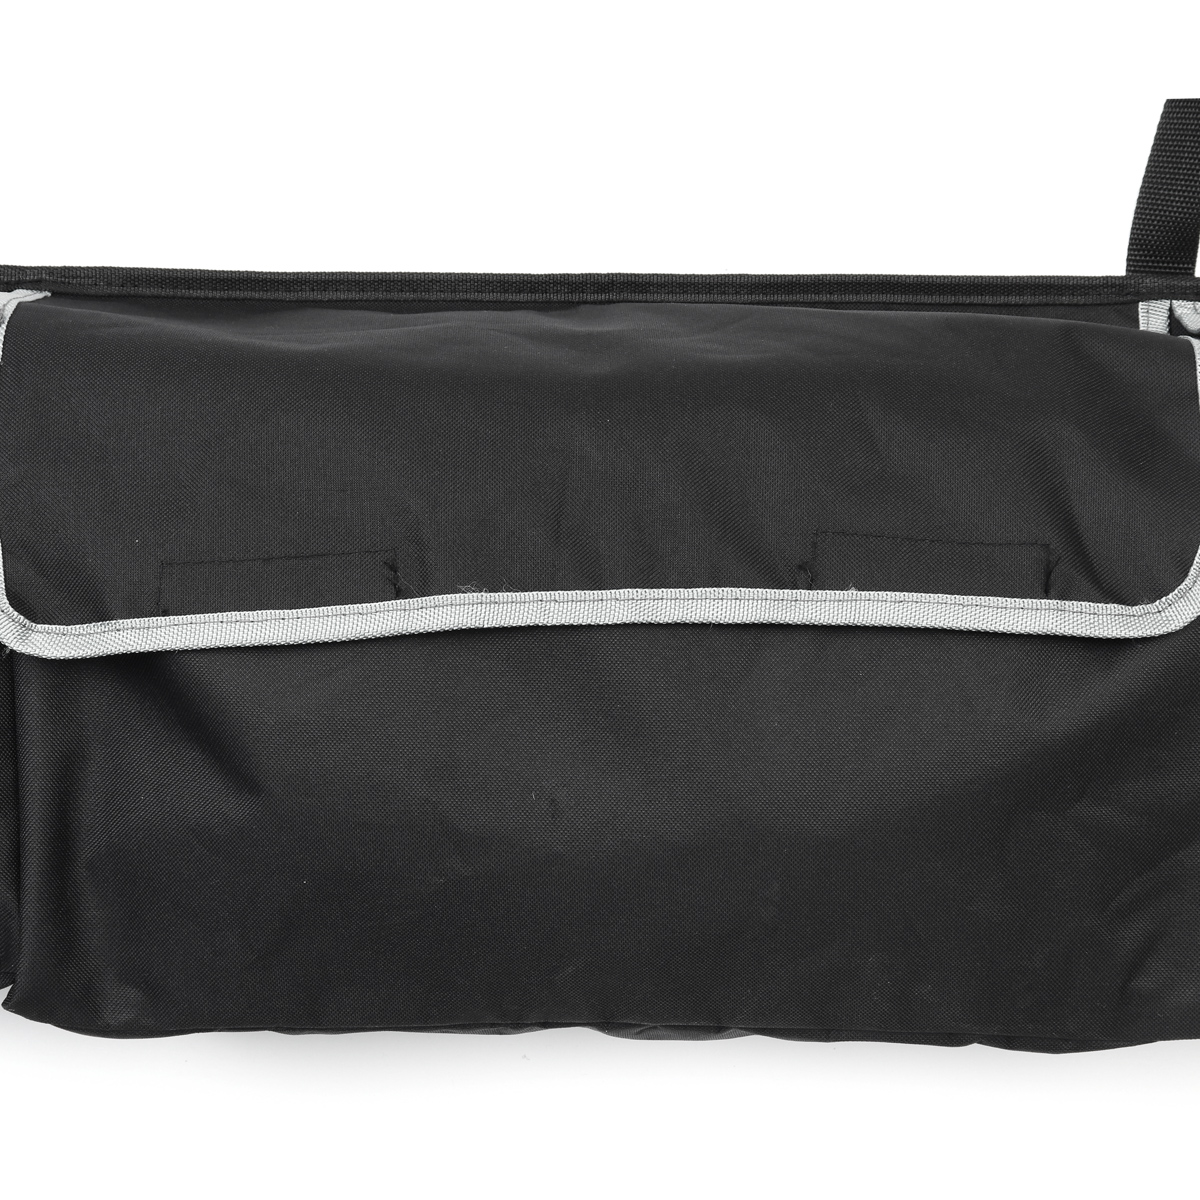 Outdoor-Travel-Car-Seat-Back-Storage-Bag-Hanging-Pack-Pouch-Rear-Trunk-Organizer-1434516-8